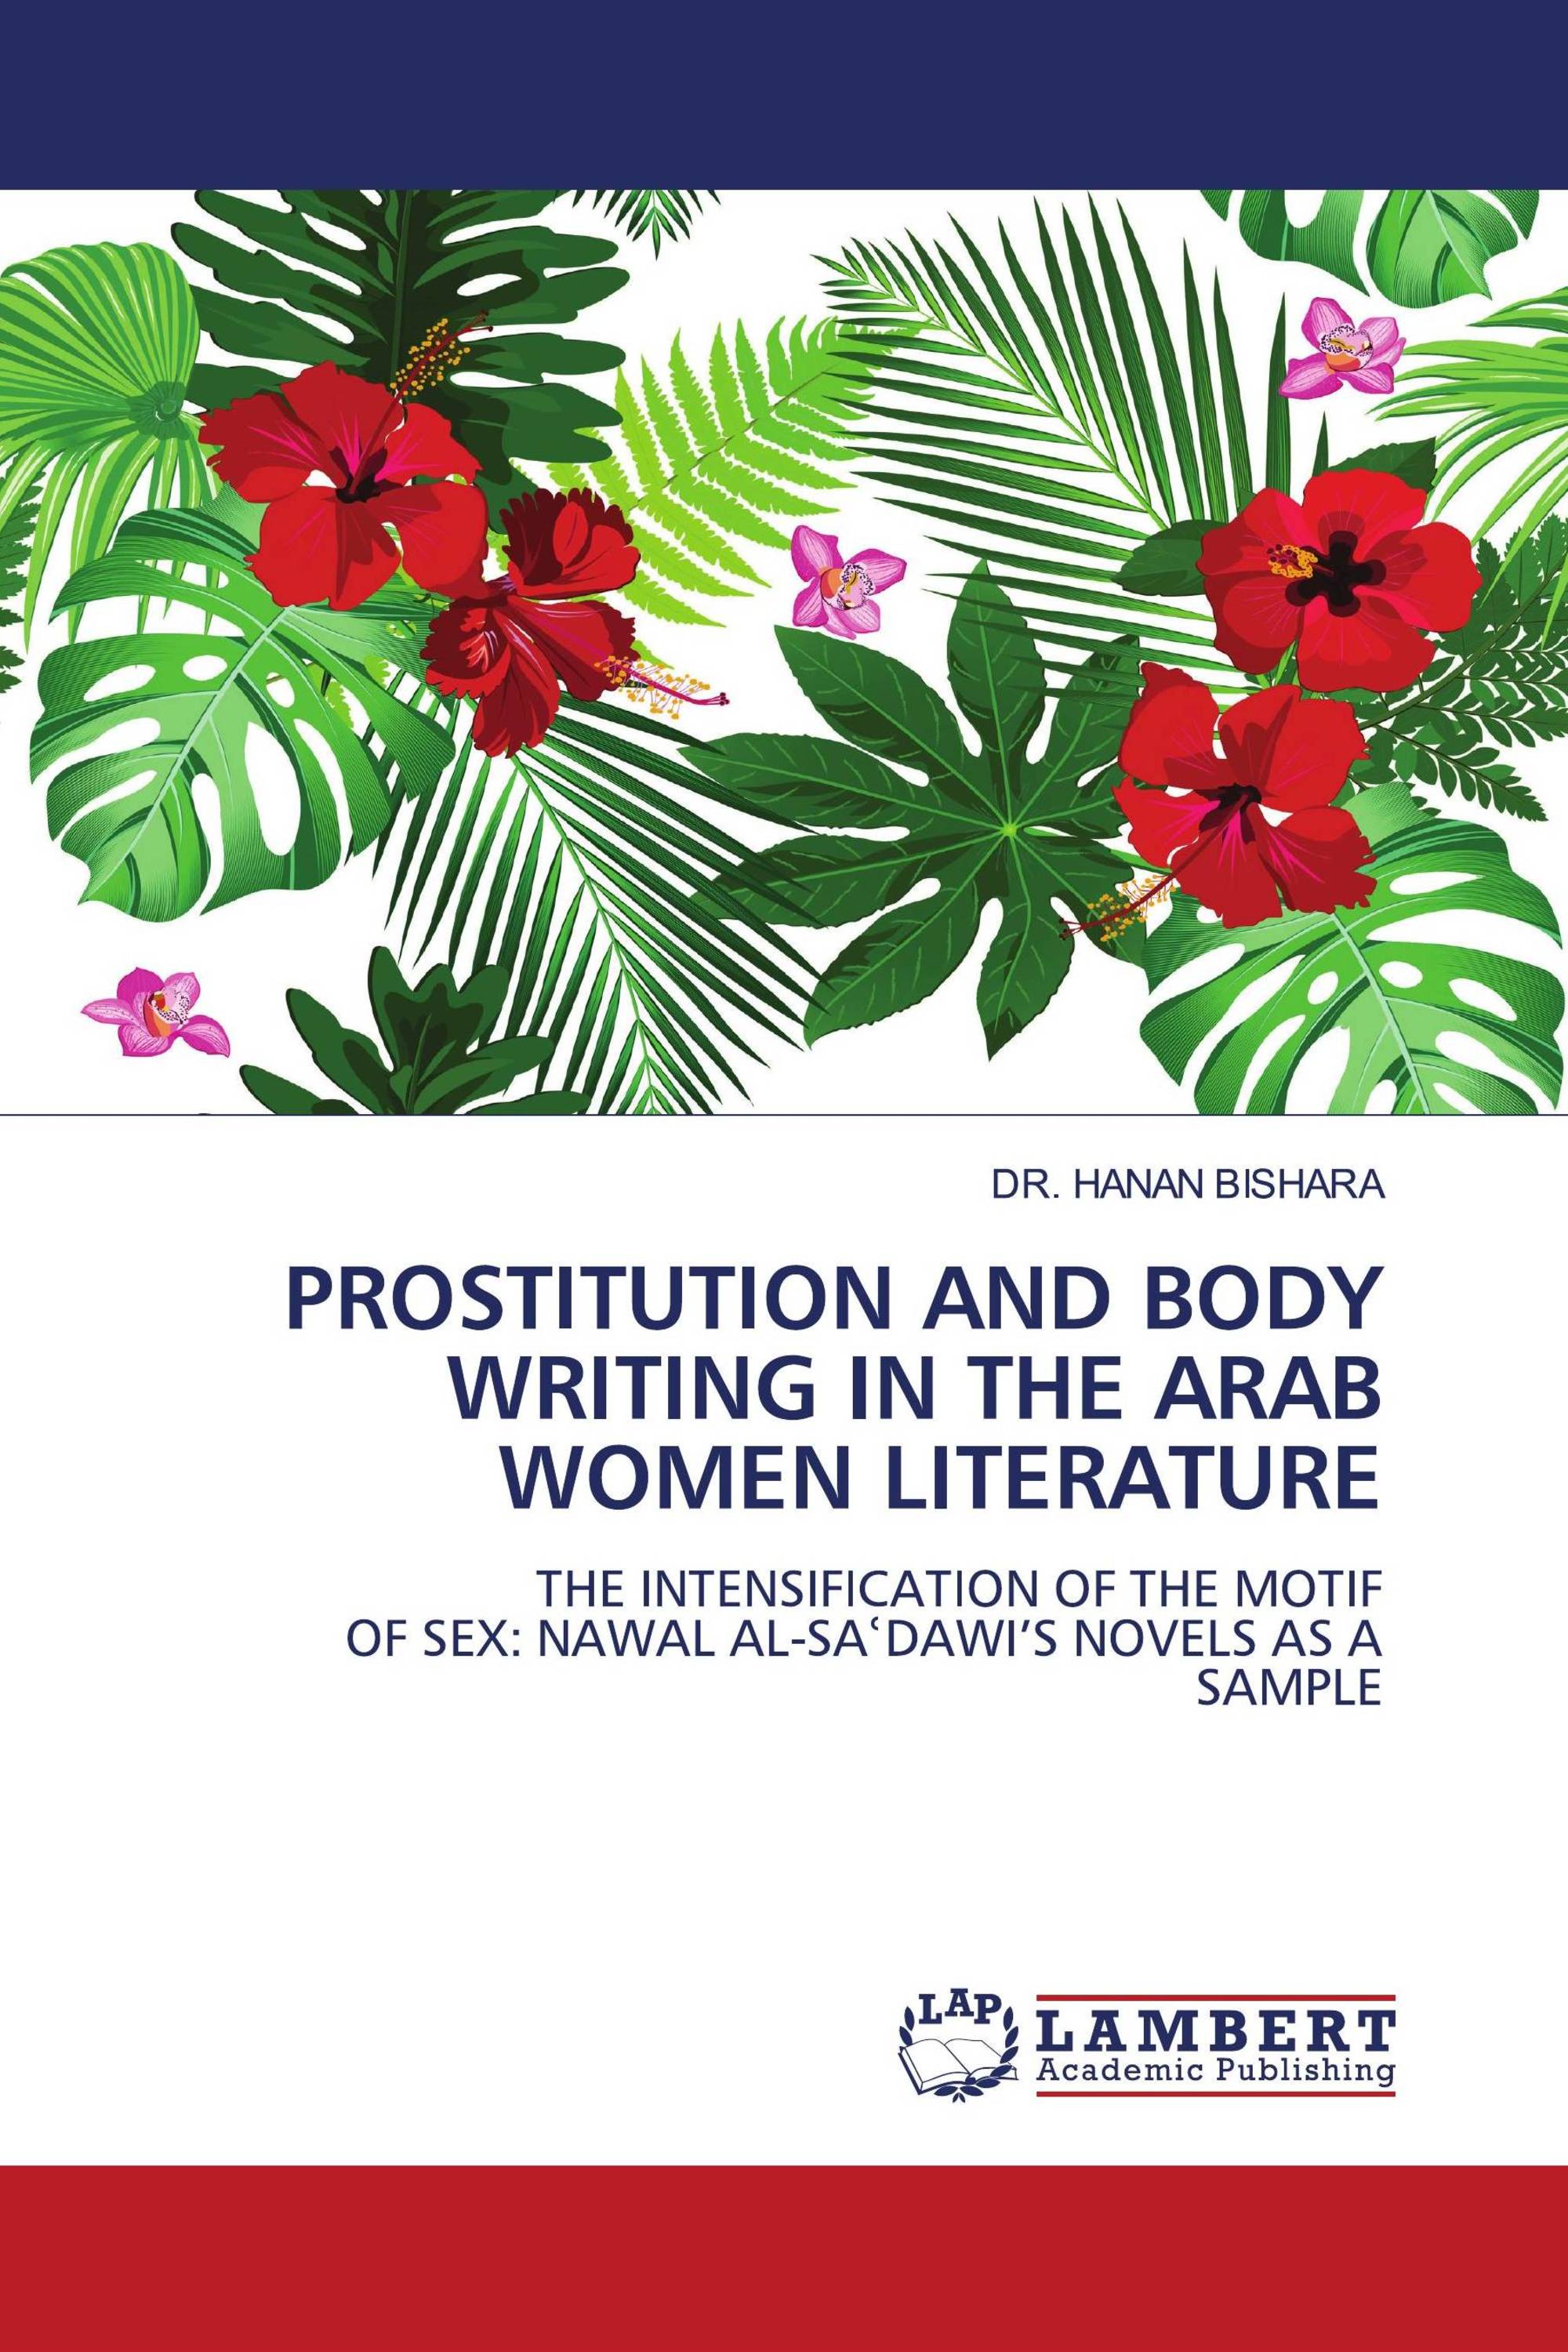 PROSTITUTION AND BODY WRITING IN THE ARAB WOMEN LITERATURE